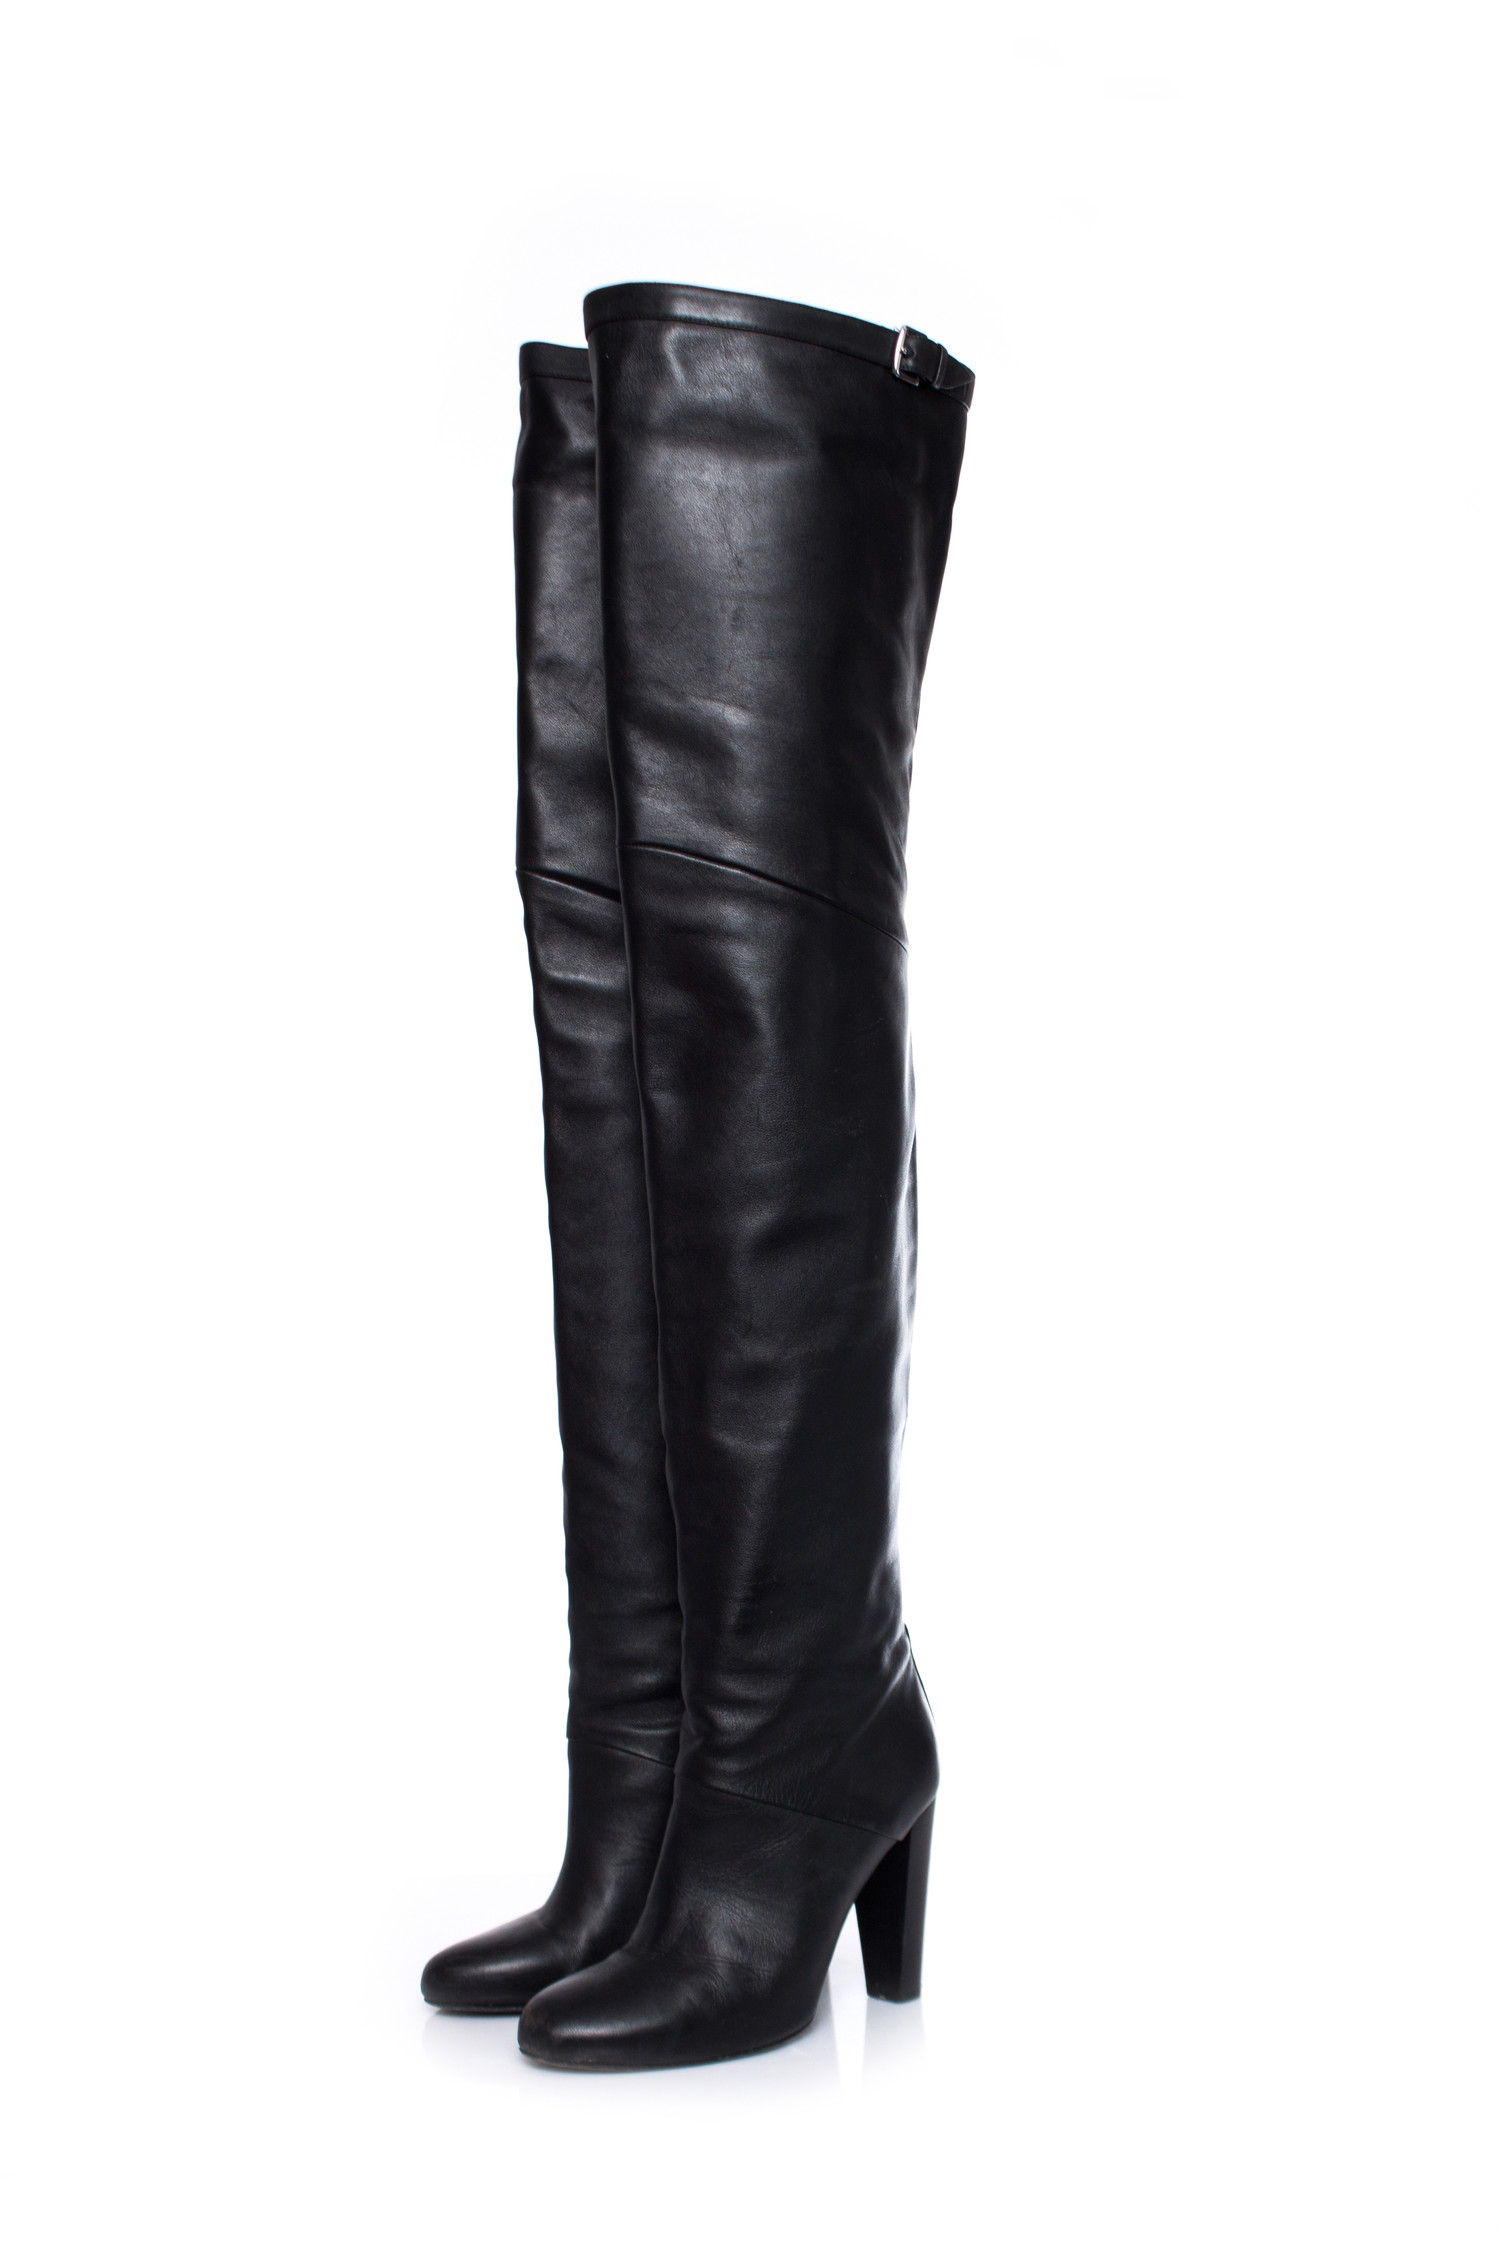 thigh high leather